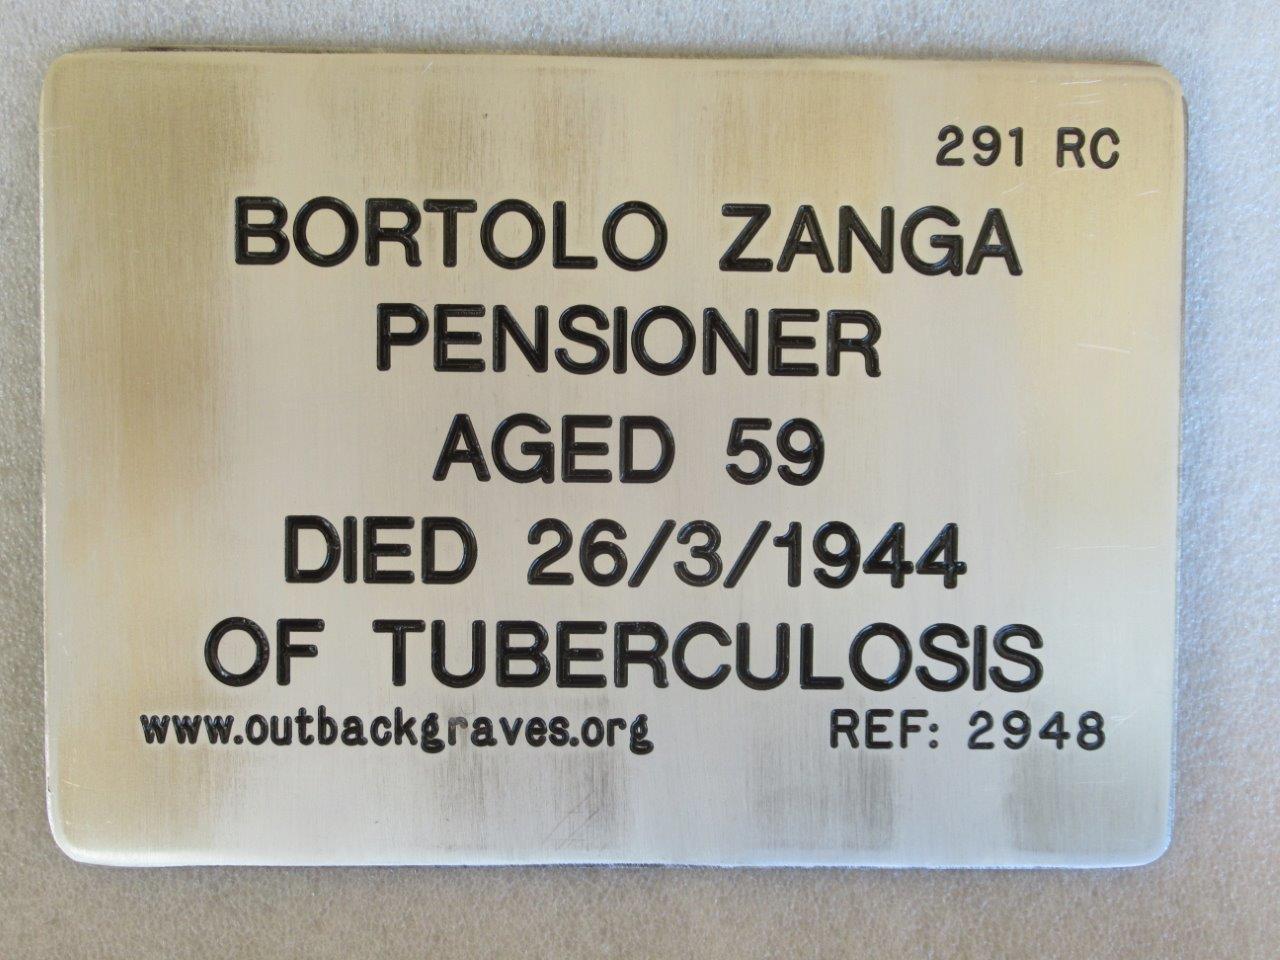 This is a photograph of plaque number 2948 for BORTOLO ZANGA at LEONORA